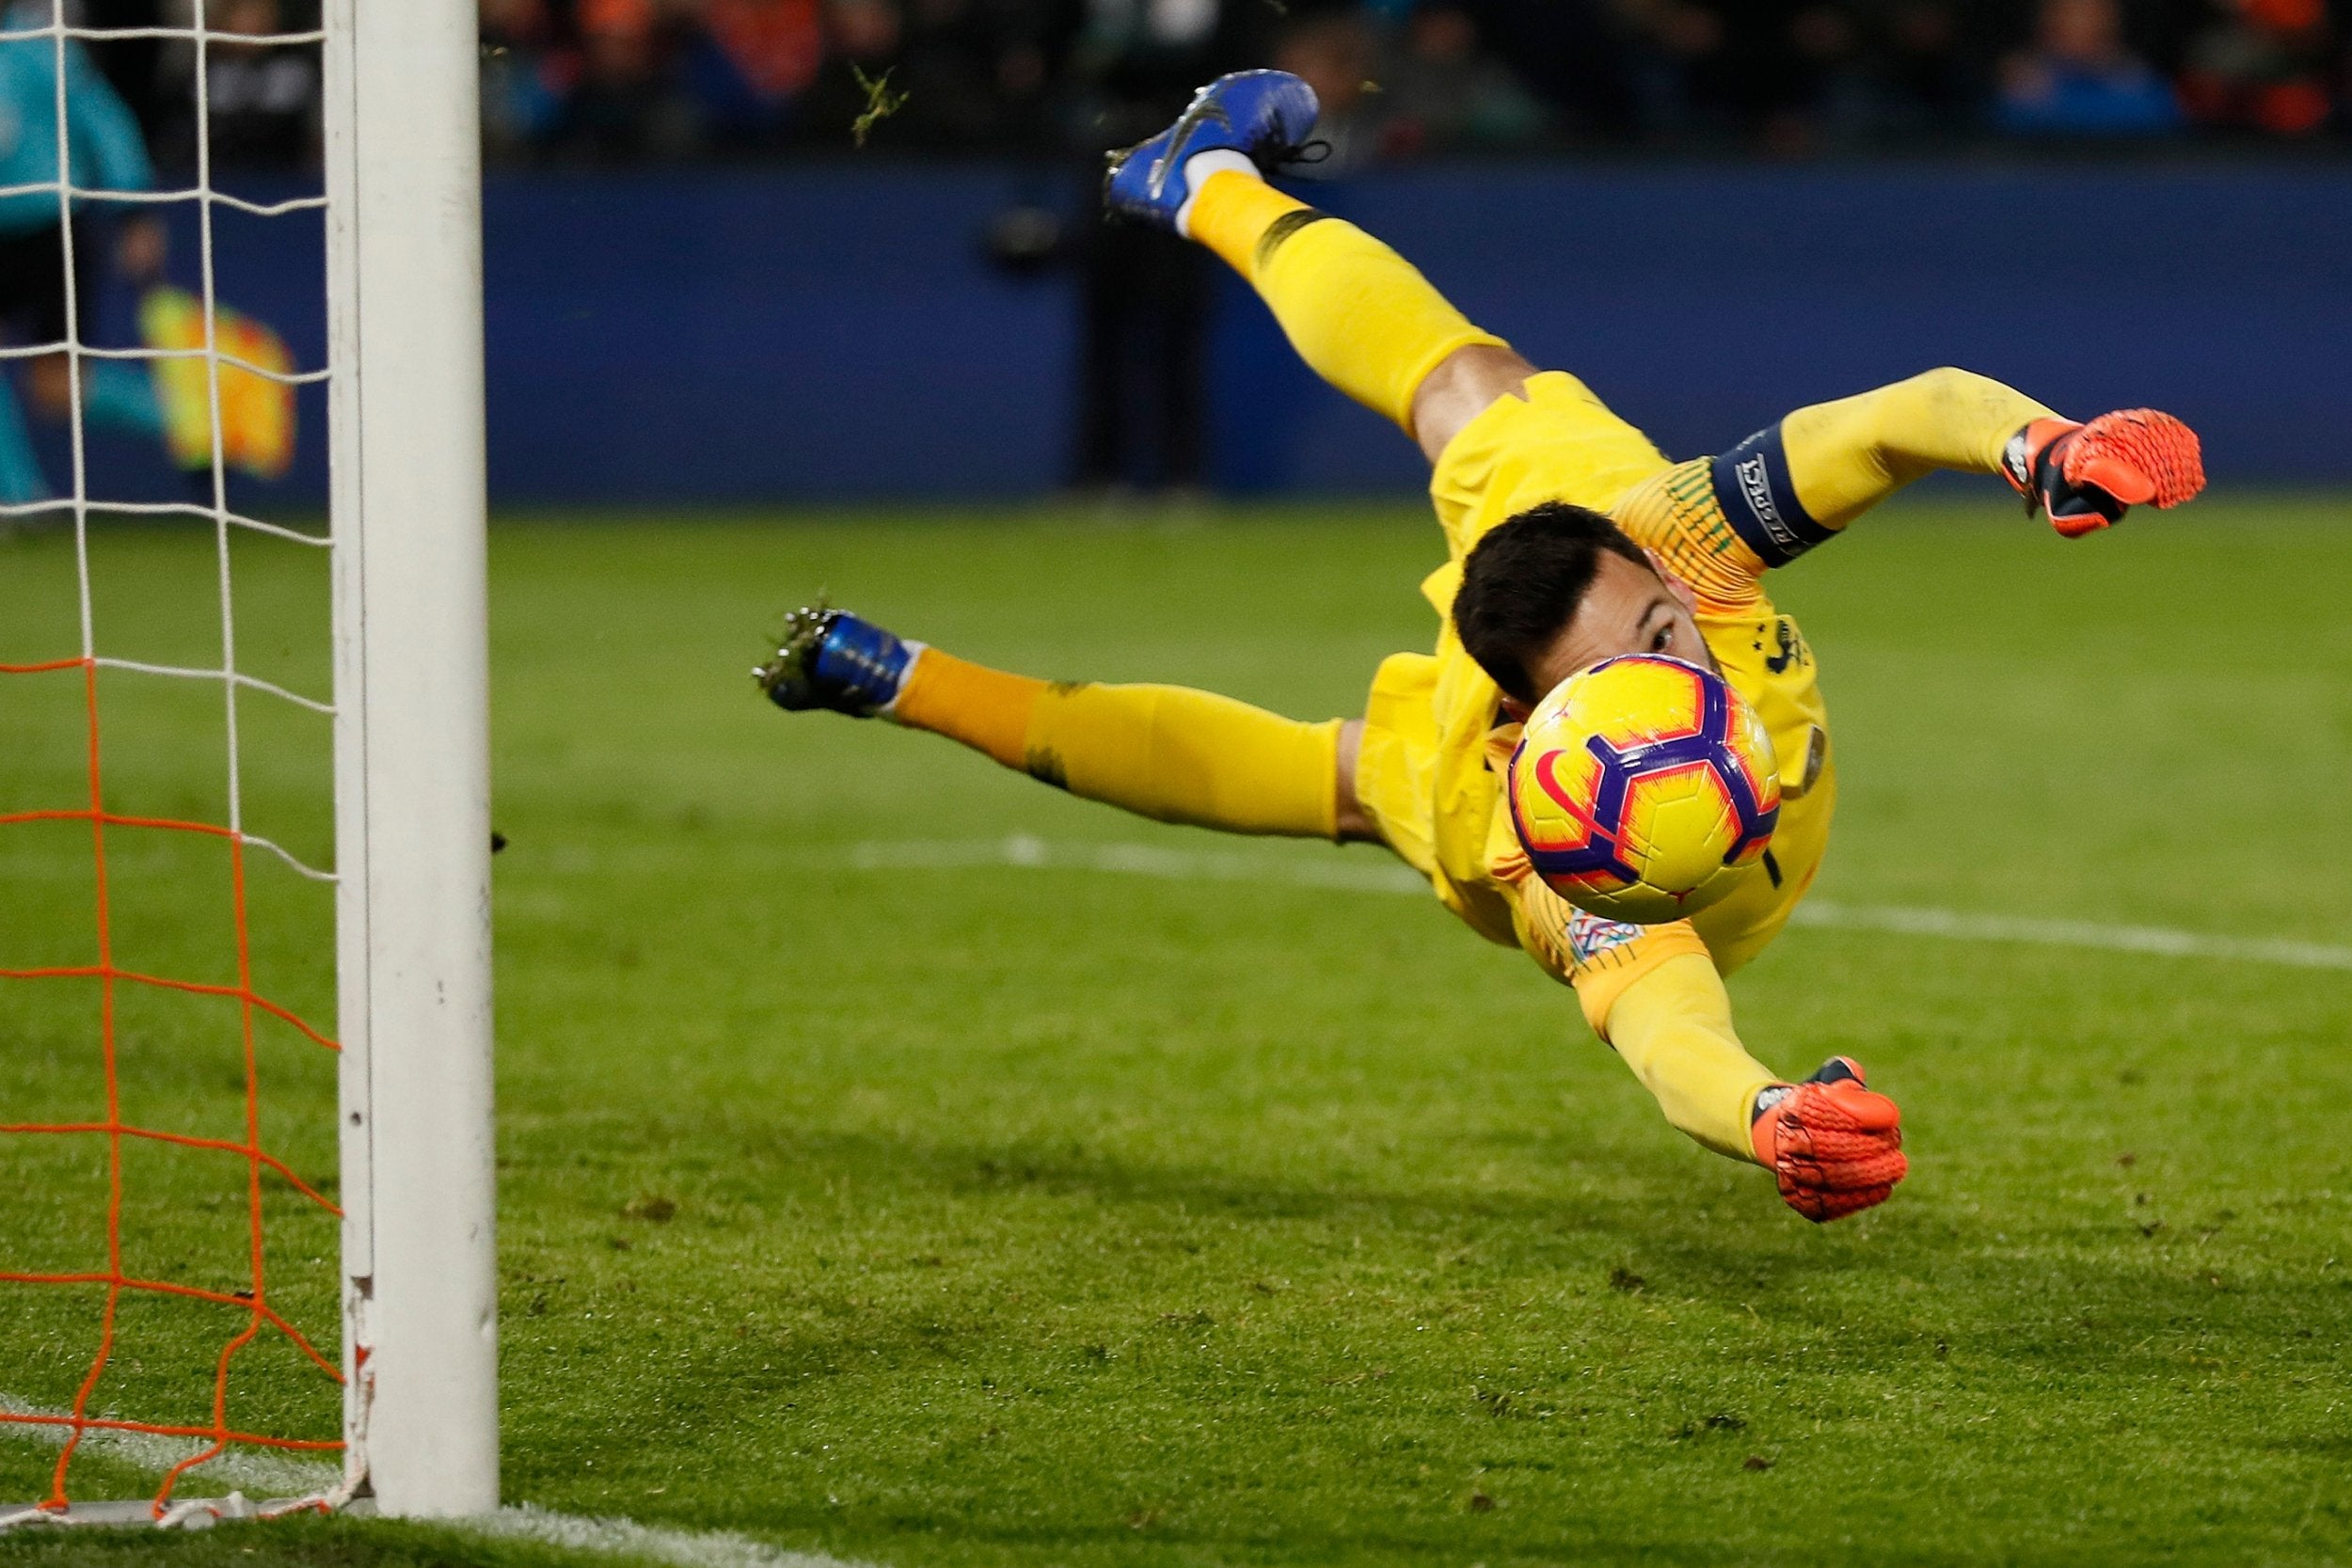 &#13;
Hugo Lloris' great goalkeeping prevented France from a further humbling &#13;